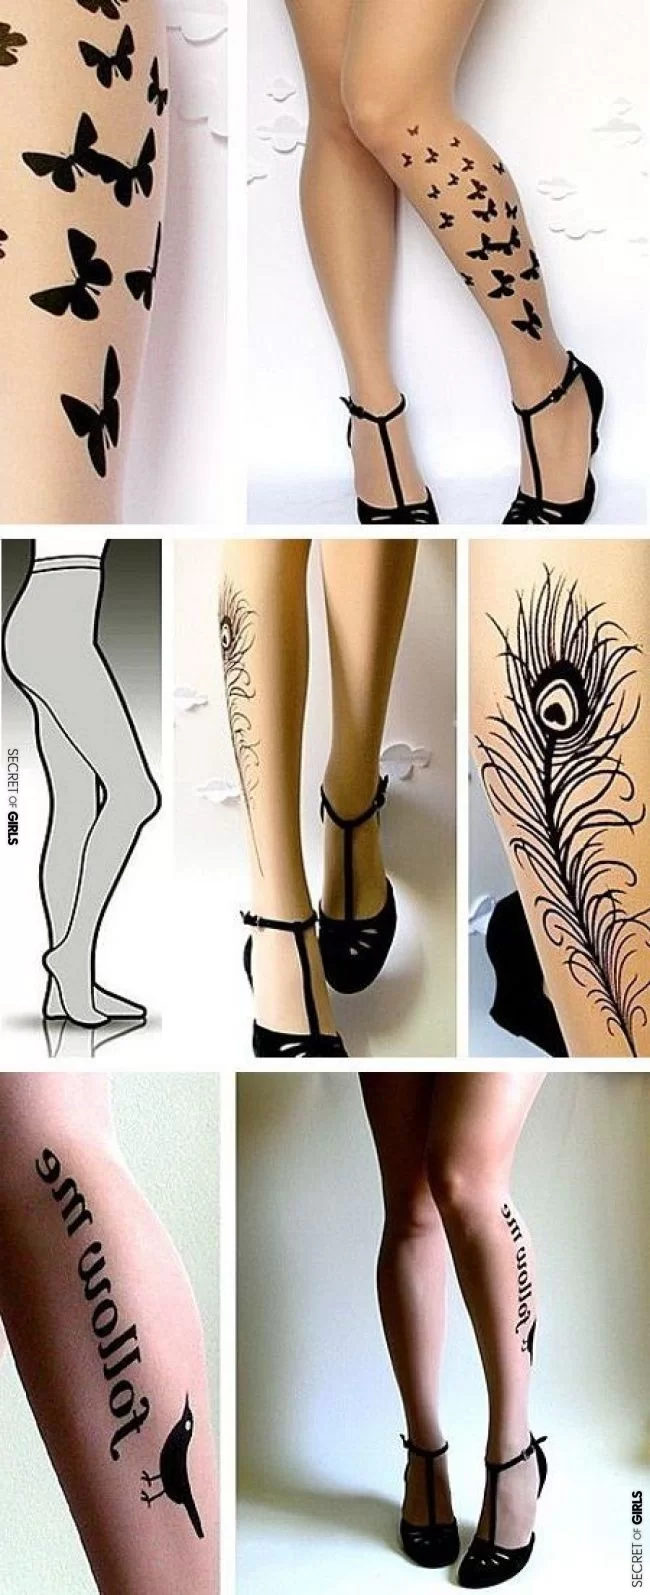 Tights That Make Your Outfits Look Awesome